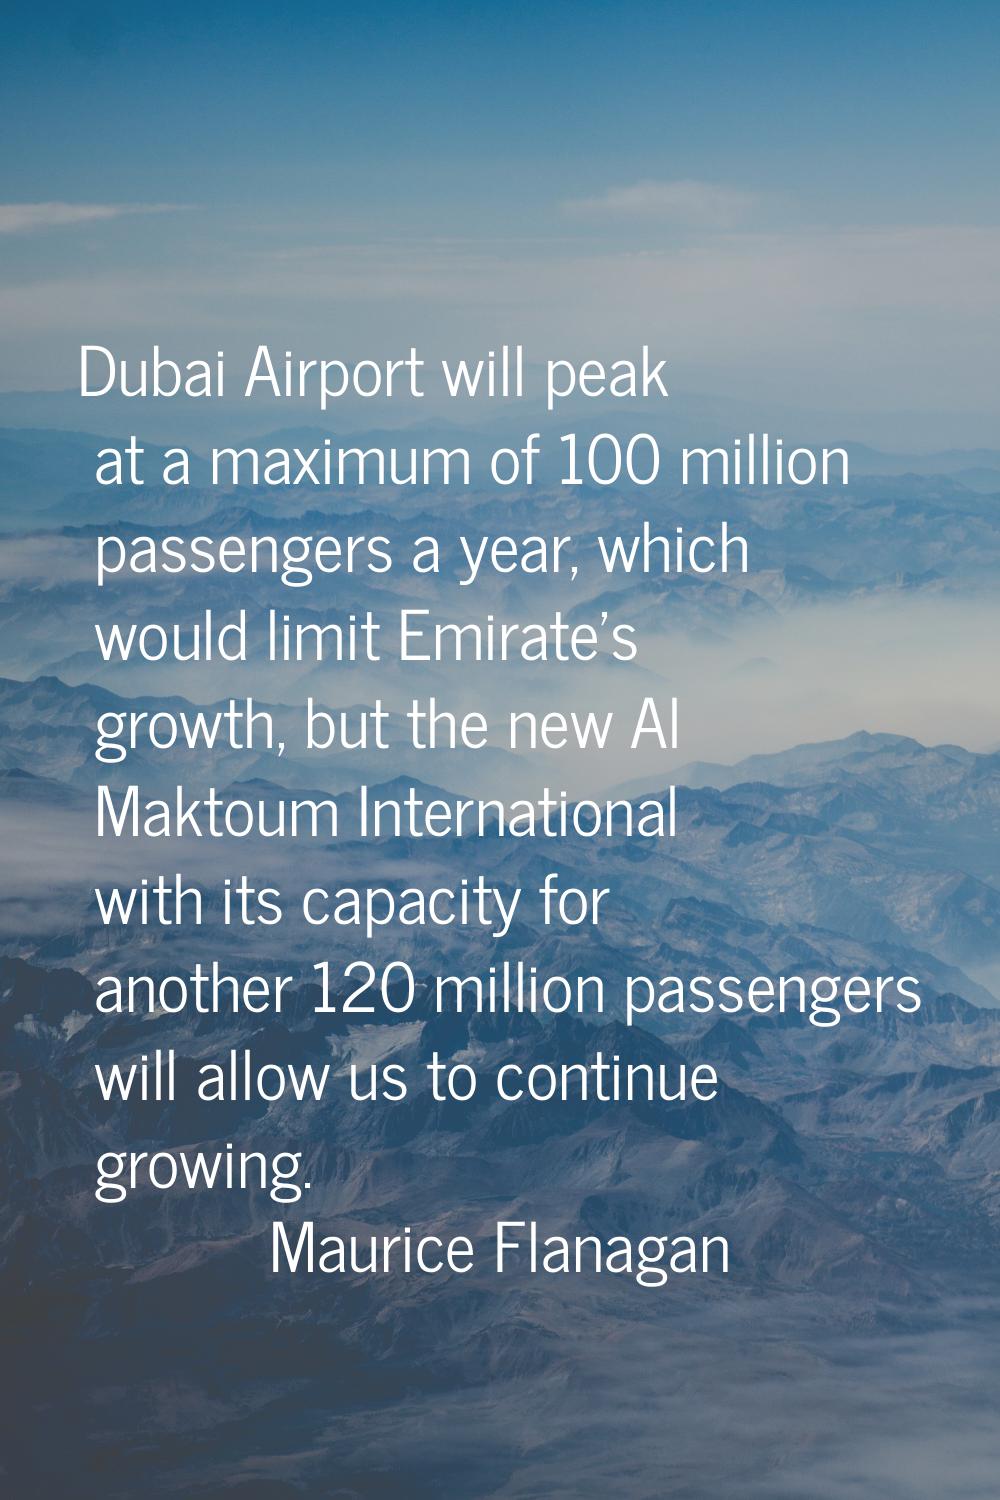 Dubai Airport will peak at a maximum of 100 million passengers a year, which would limit Emirate's 